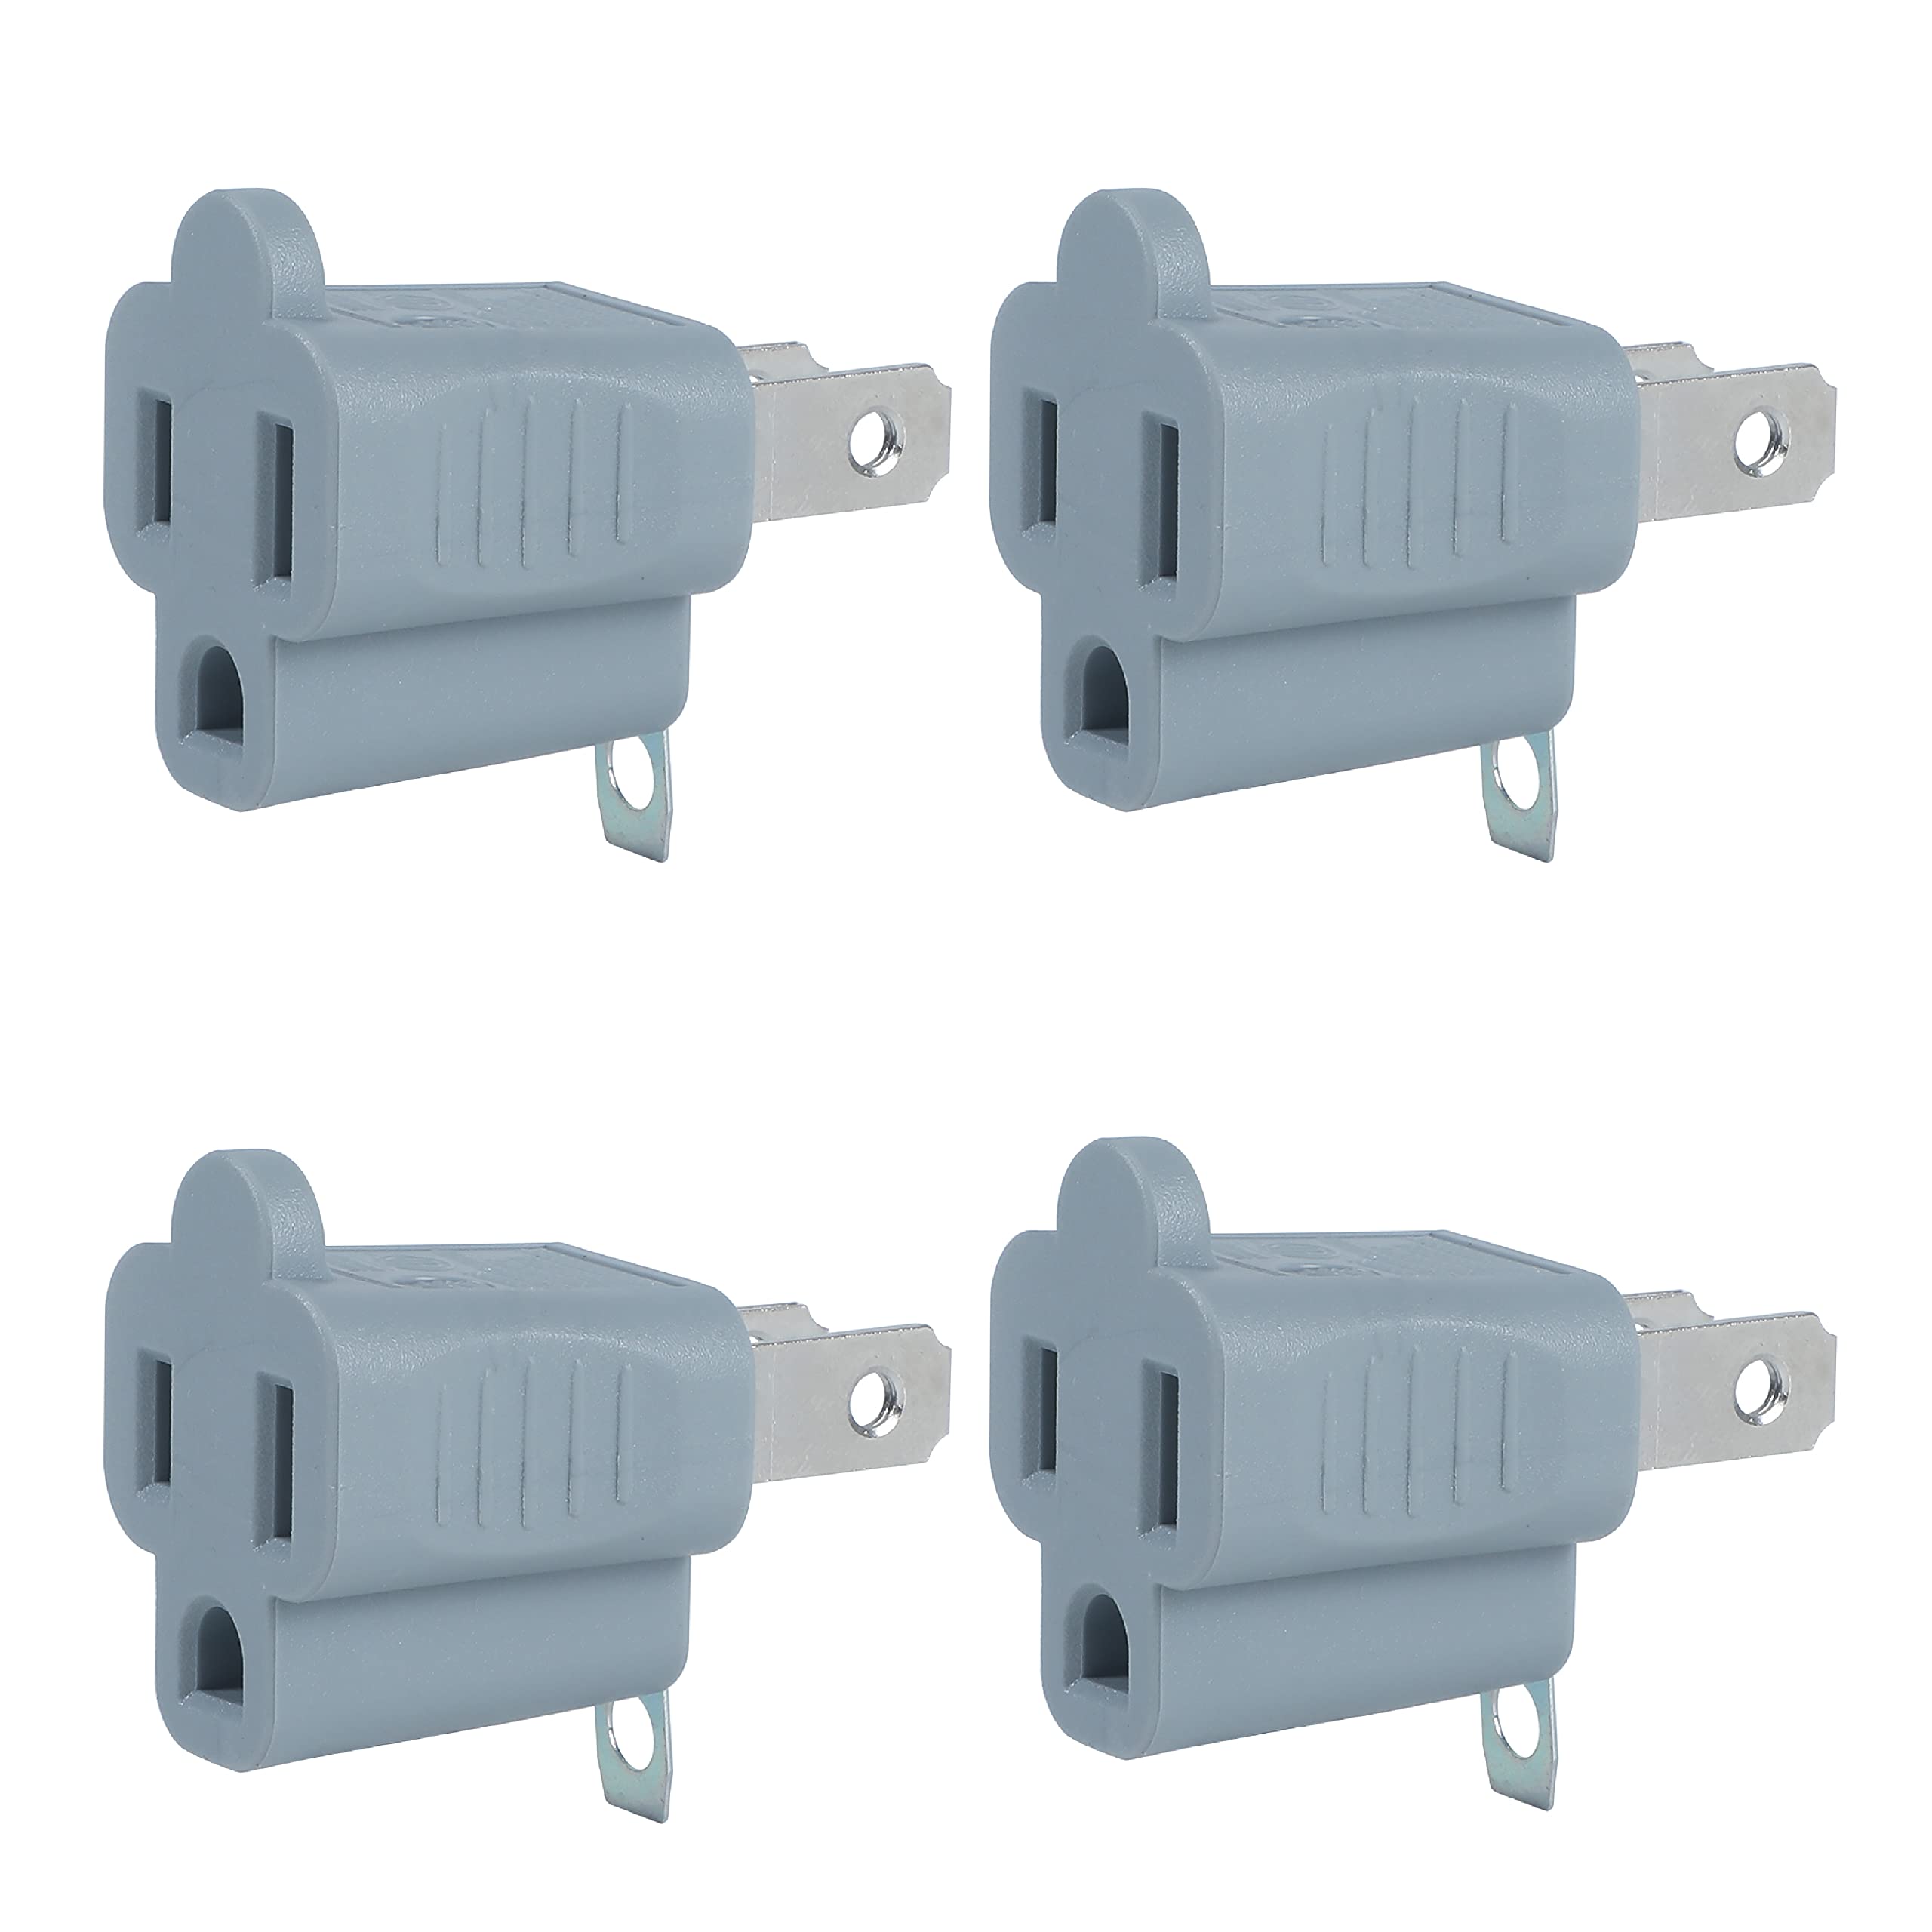 Coby 2 Prong To 3 Prong Outlet Adapter ? 4 Pack